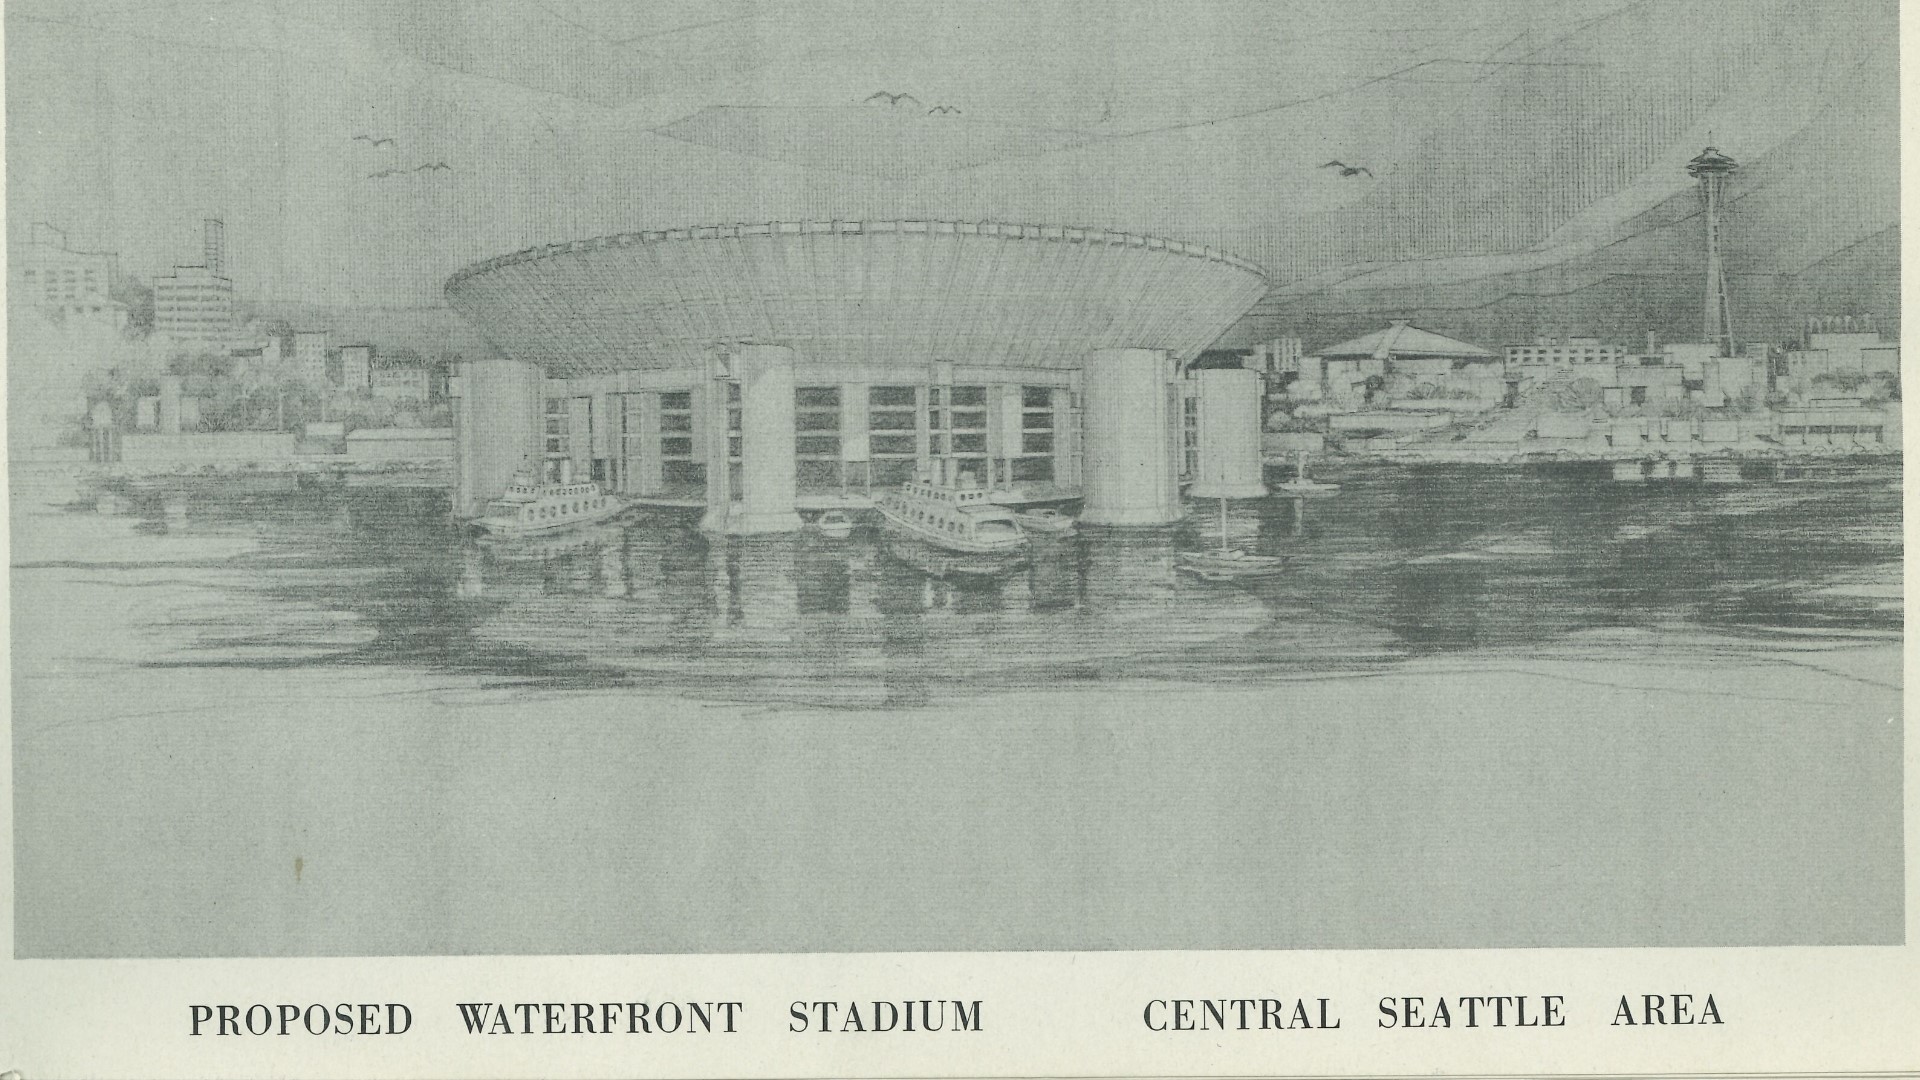 Seattle saw a lot of success with the Space Needle's debut at the 1962 Seattle World's Fair. So, they wanted to go bigger. Bolder. They wanted...a floating stadium?